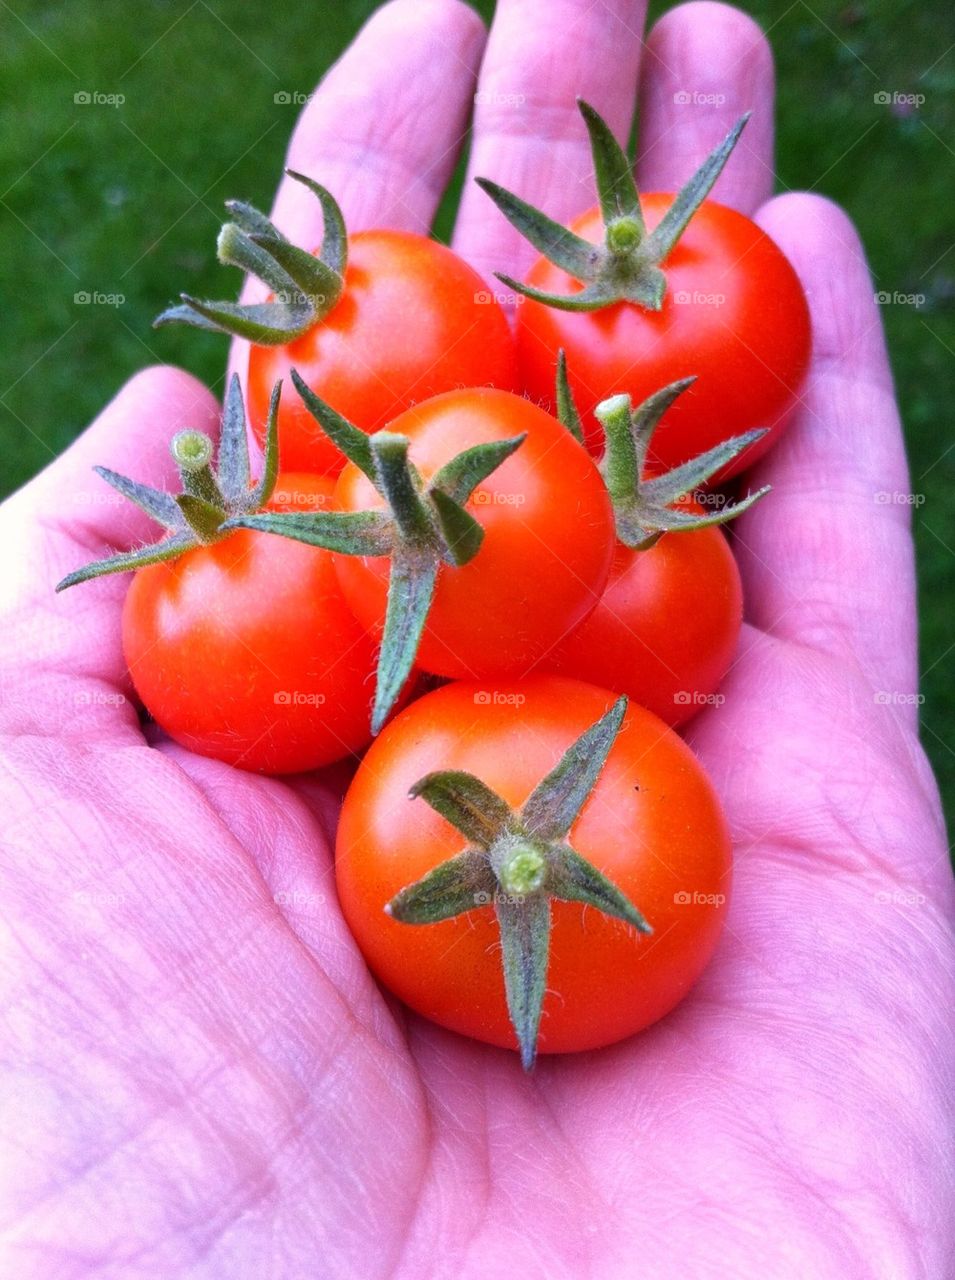 Hand with fresh small tomatoes.